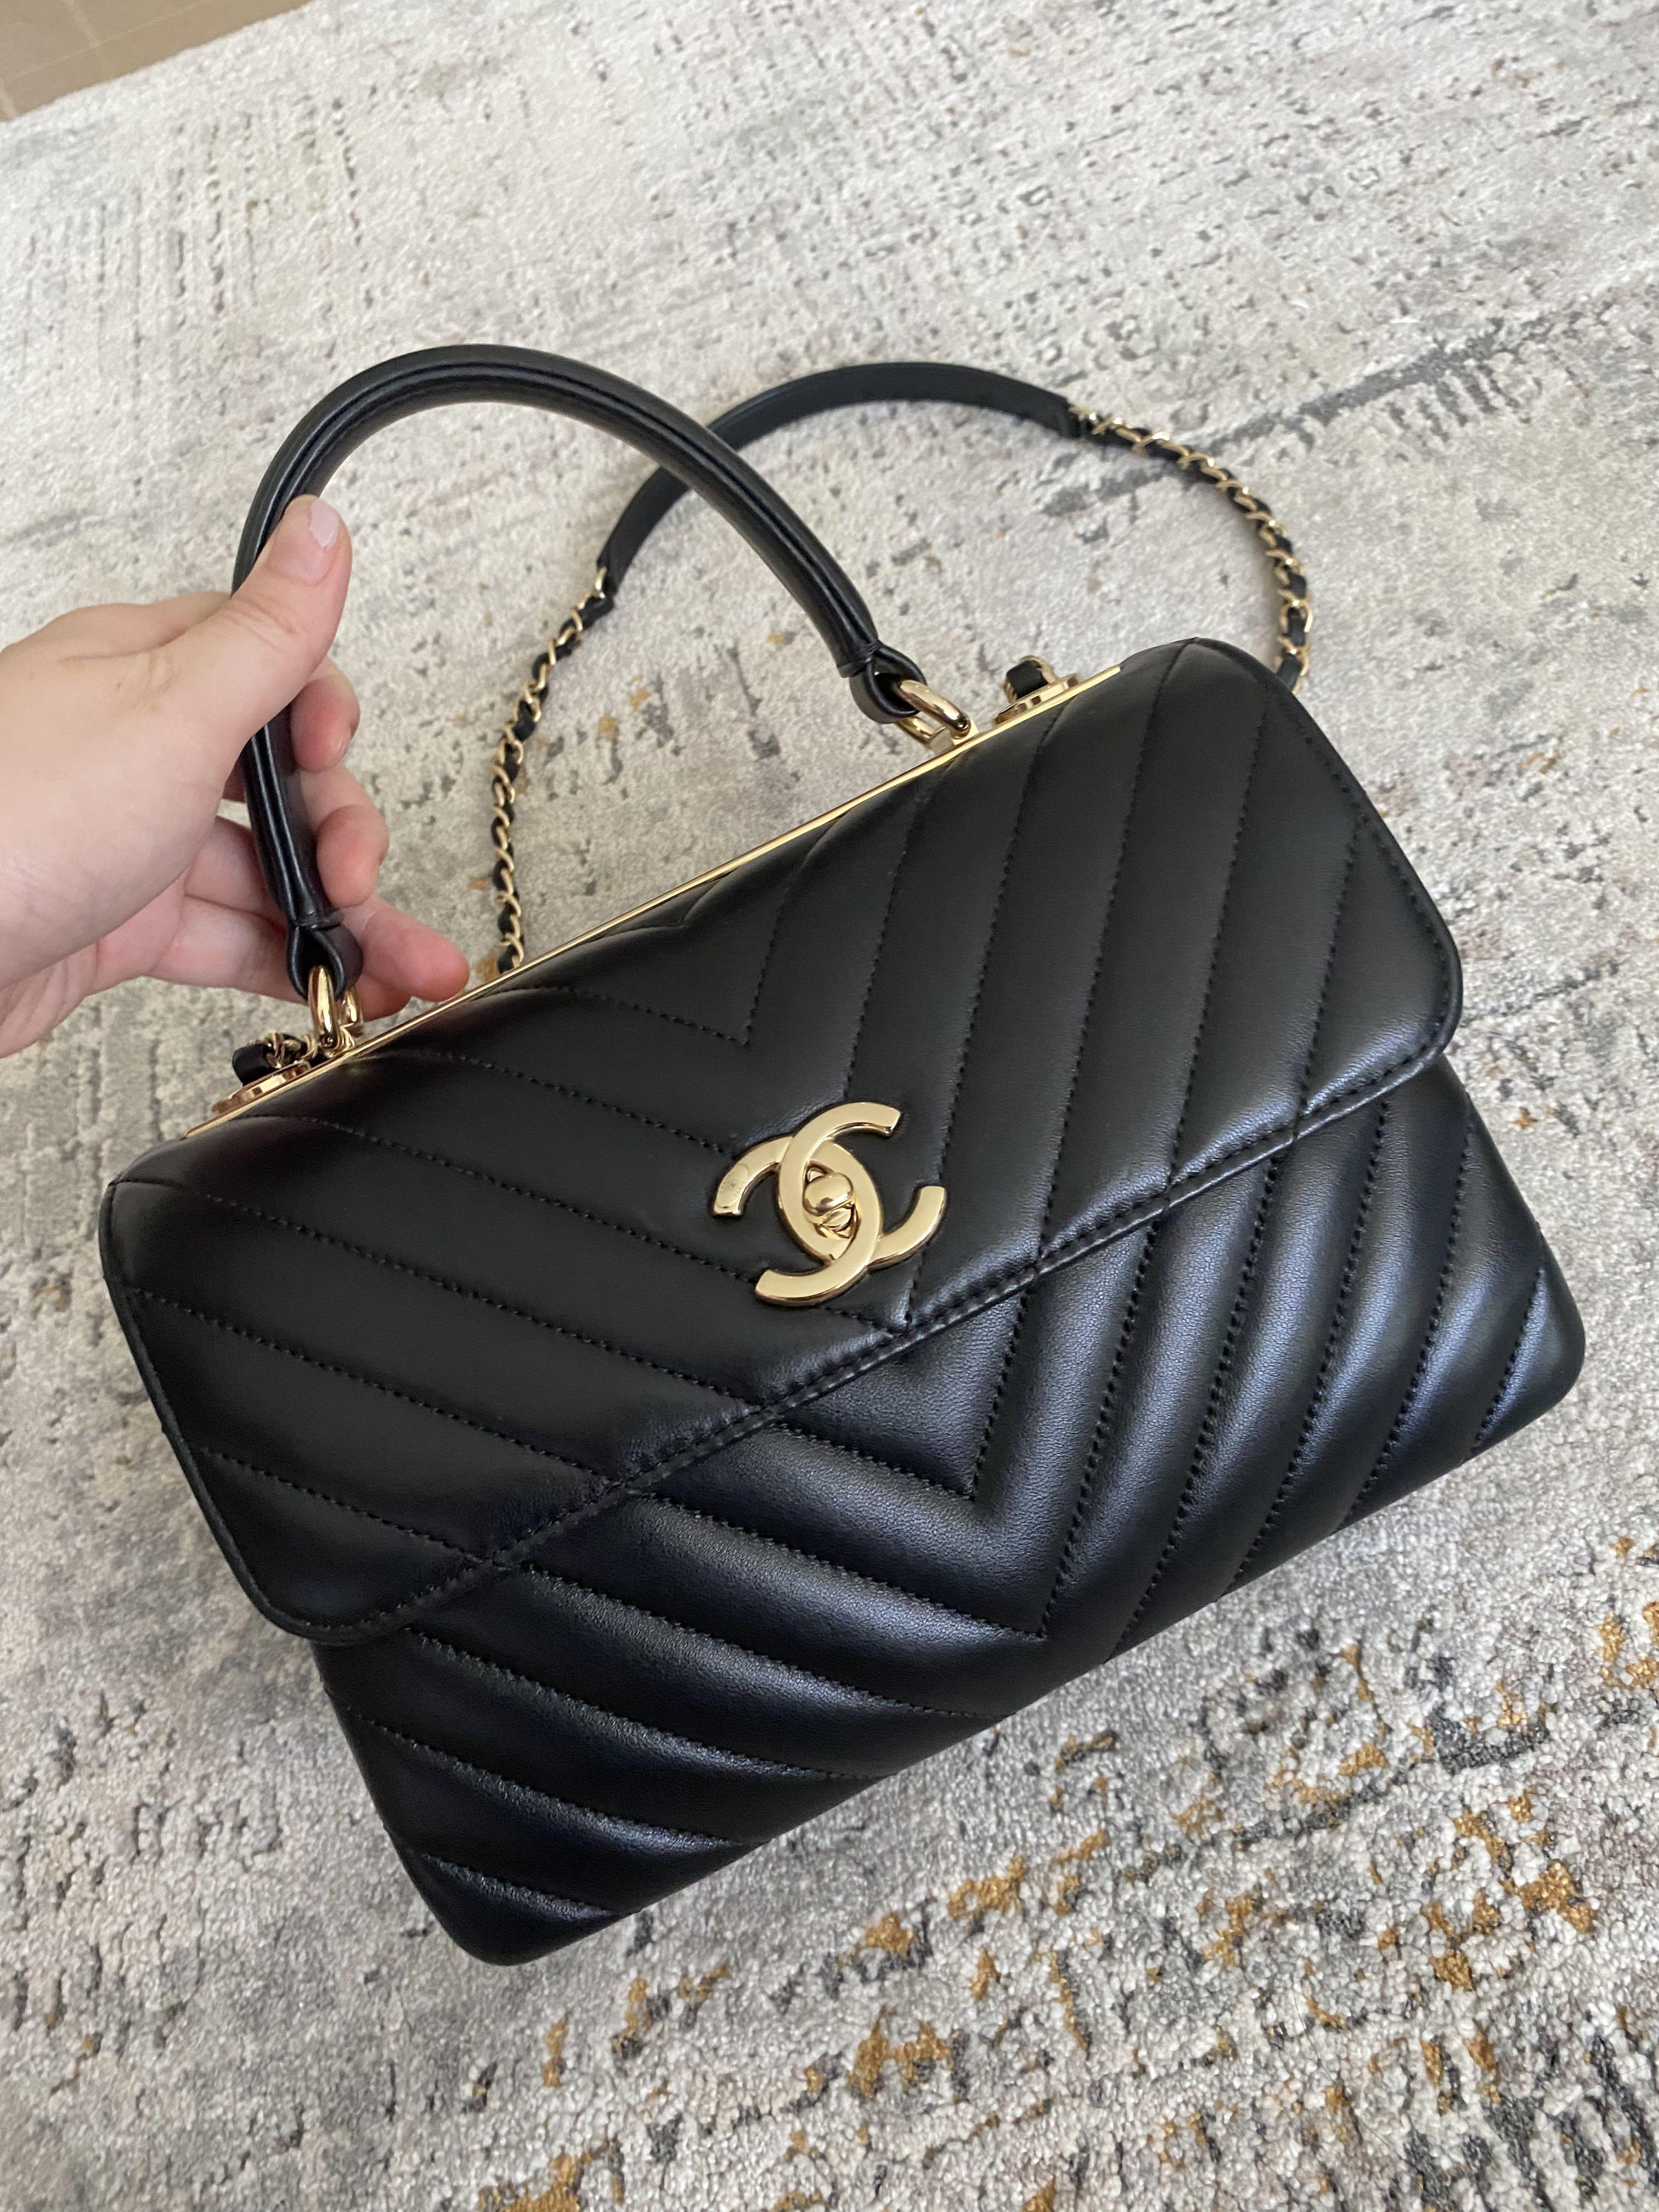 CHANEL - CC Quilted Leather Flap - Ecru/ Gold-tone - Shoulder Bag/ Crossbody